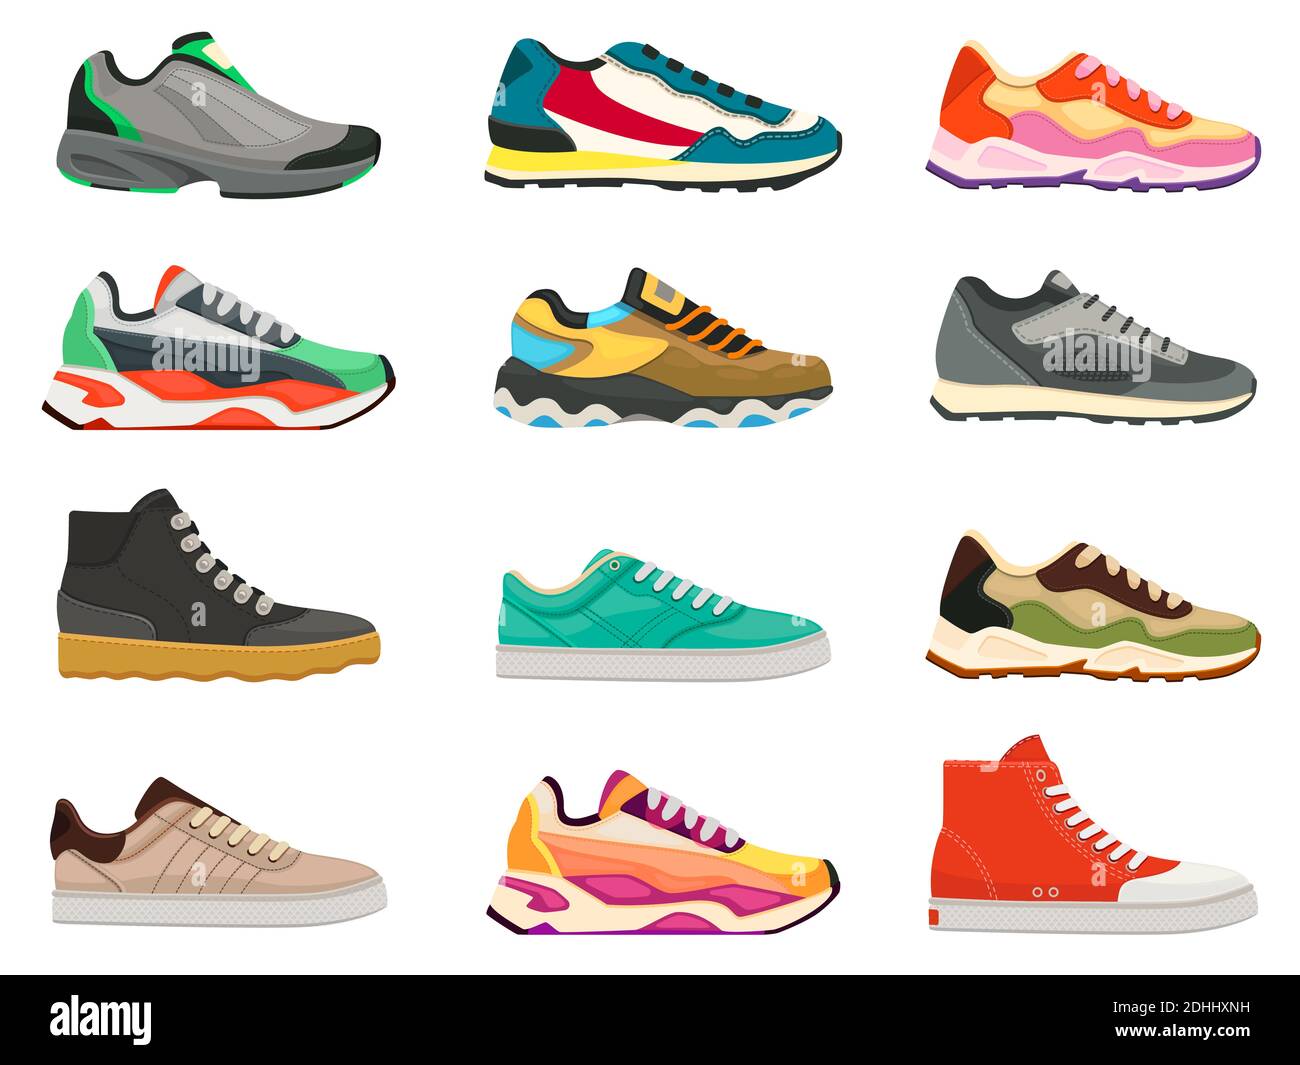 Design shoe Stock Vector Images - Alamy